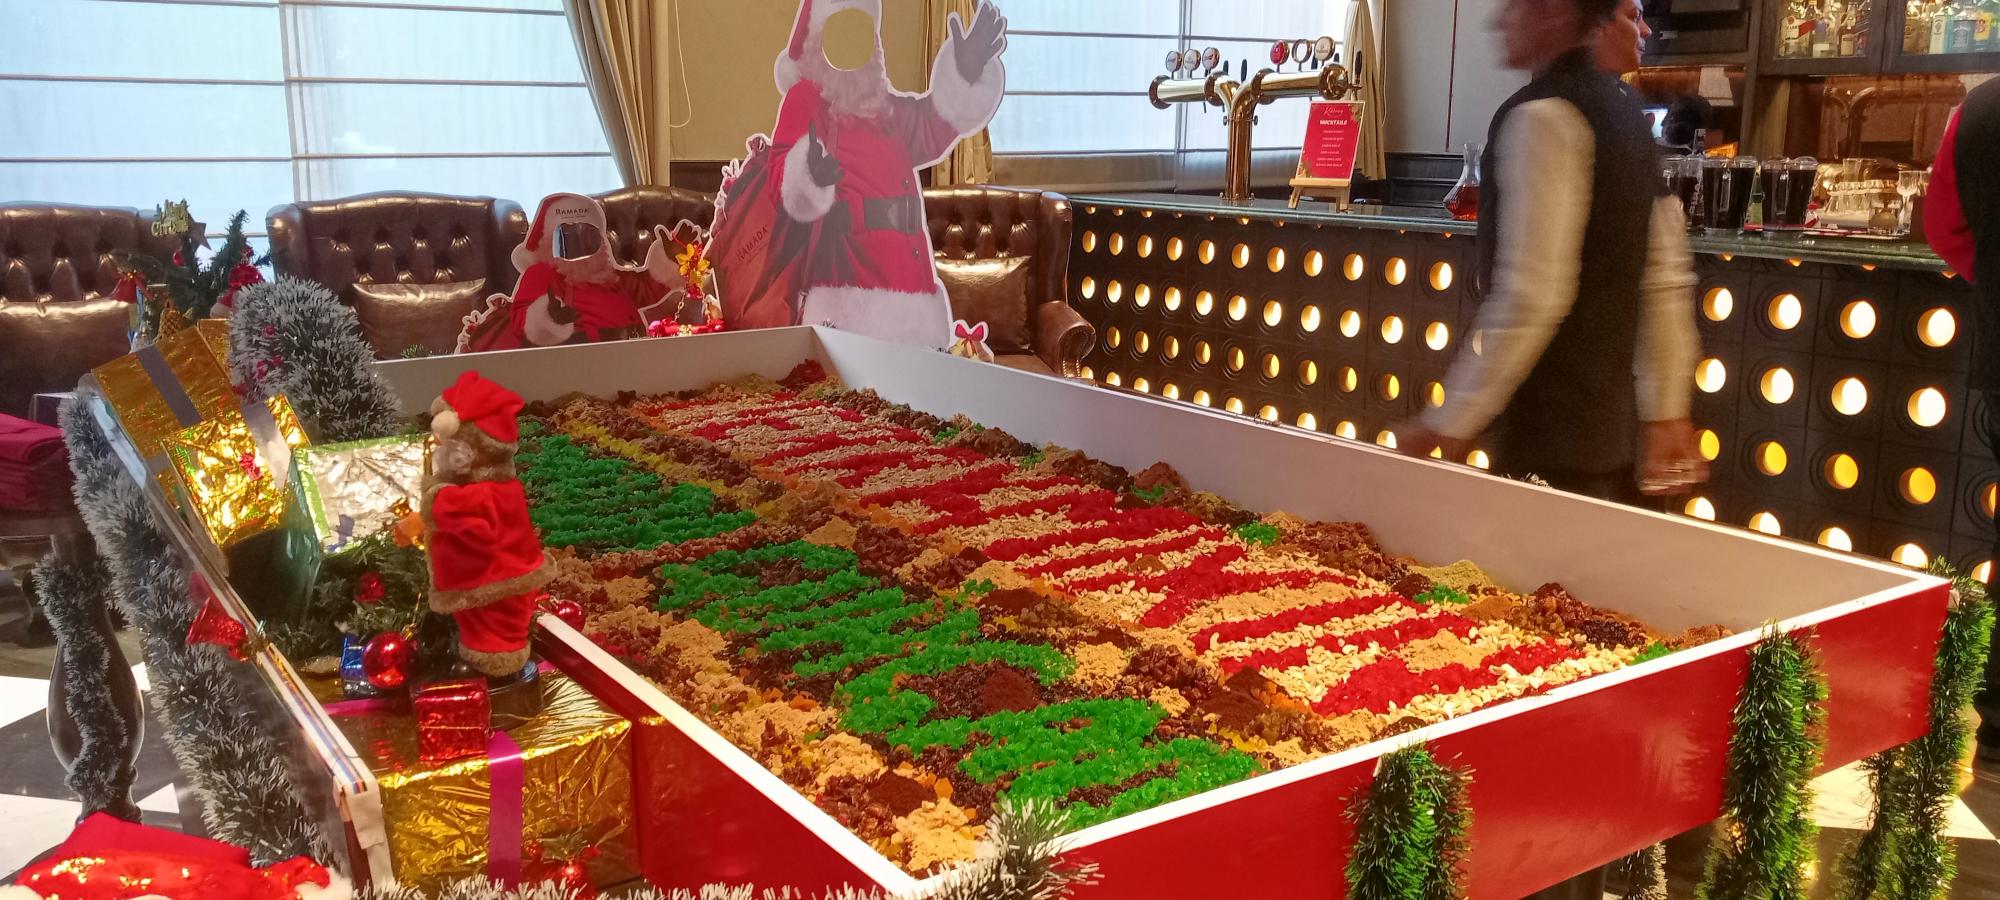 Cake-mixing: From family affairs to hotel fests